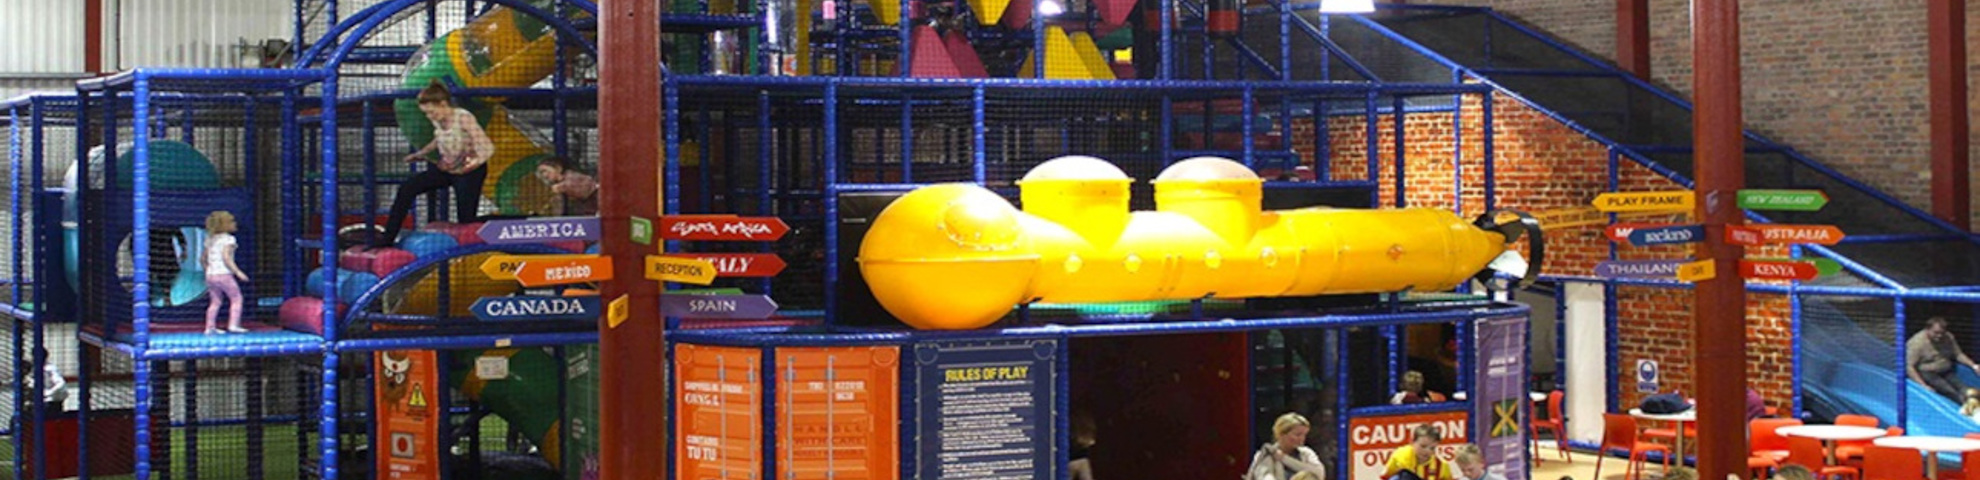 An indoor children's play centre, with a large yellow submarine which children can play in.